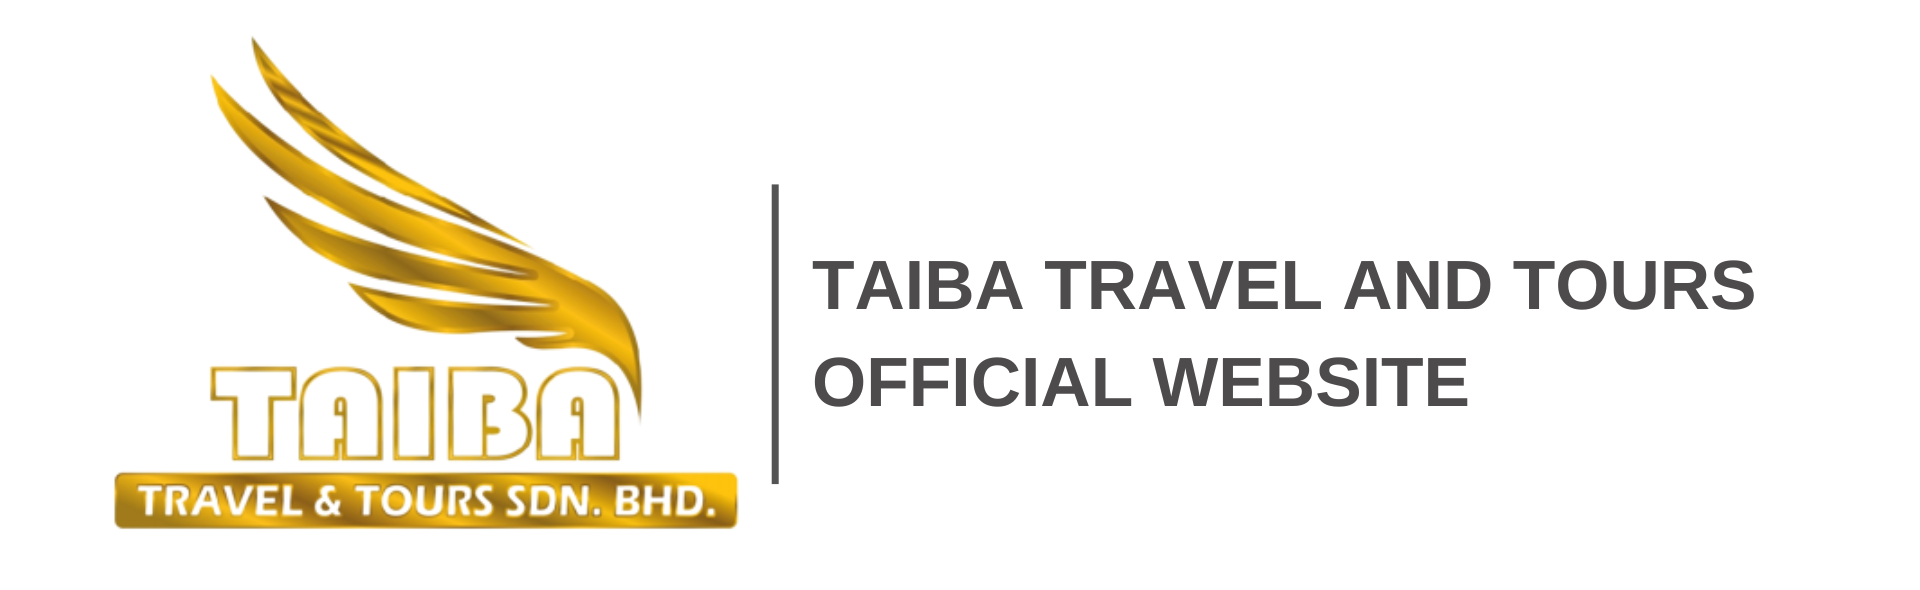 al taiba tours and travels